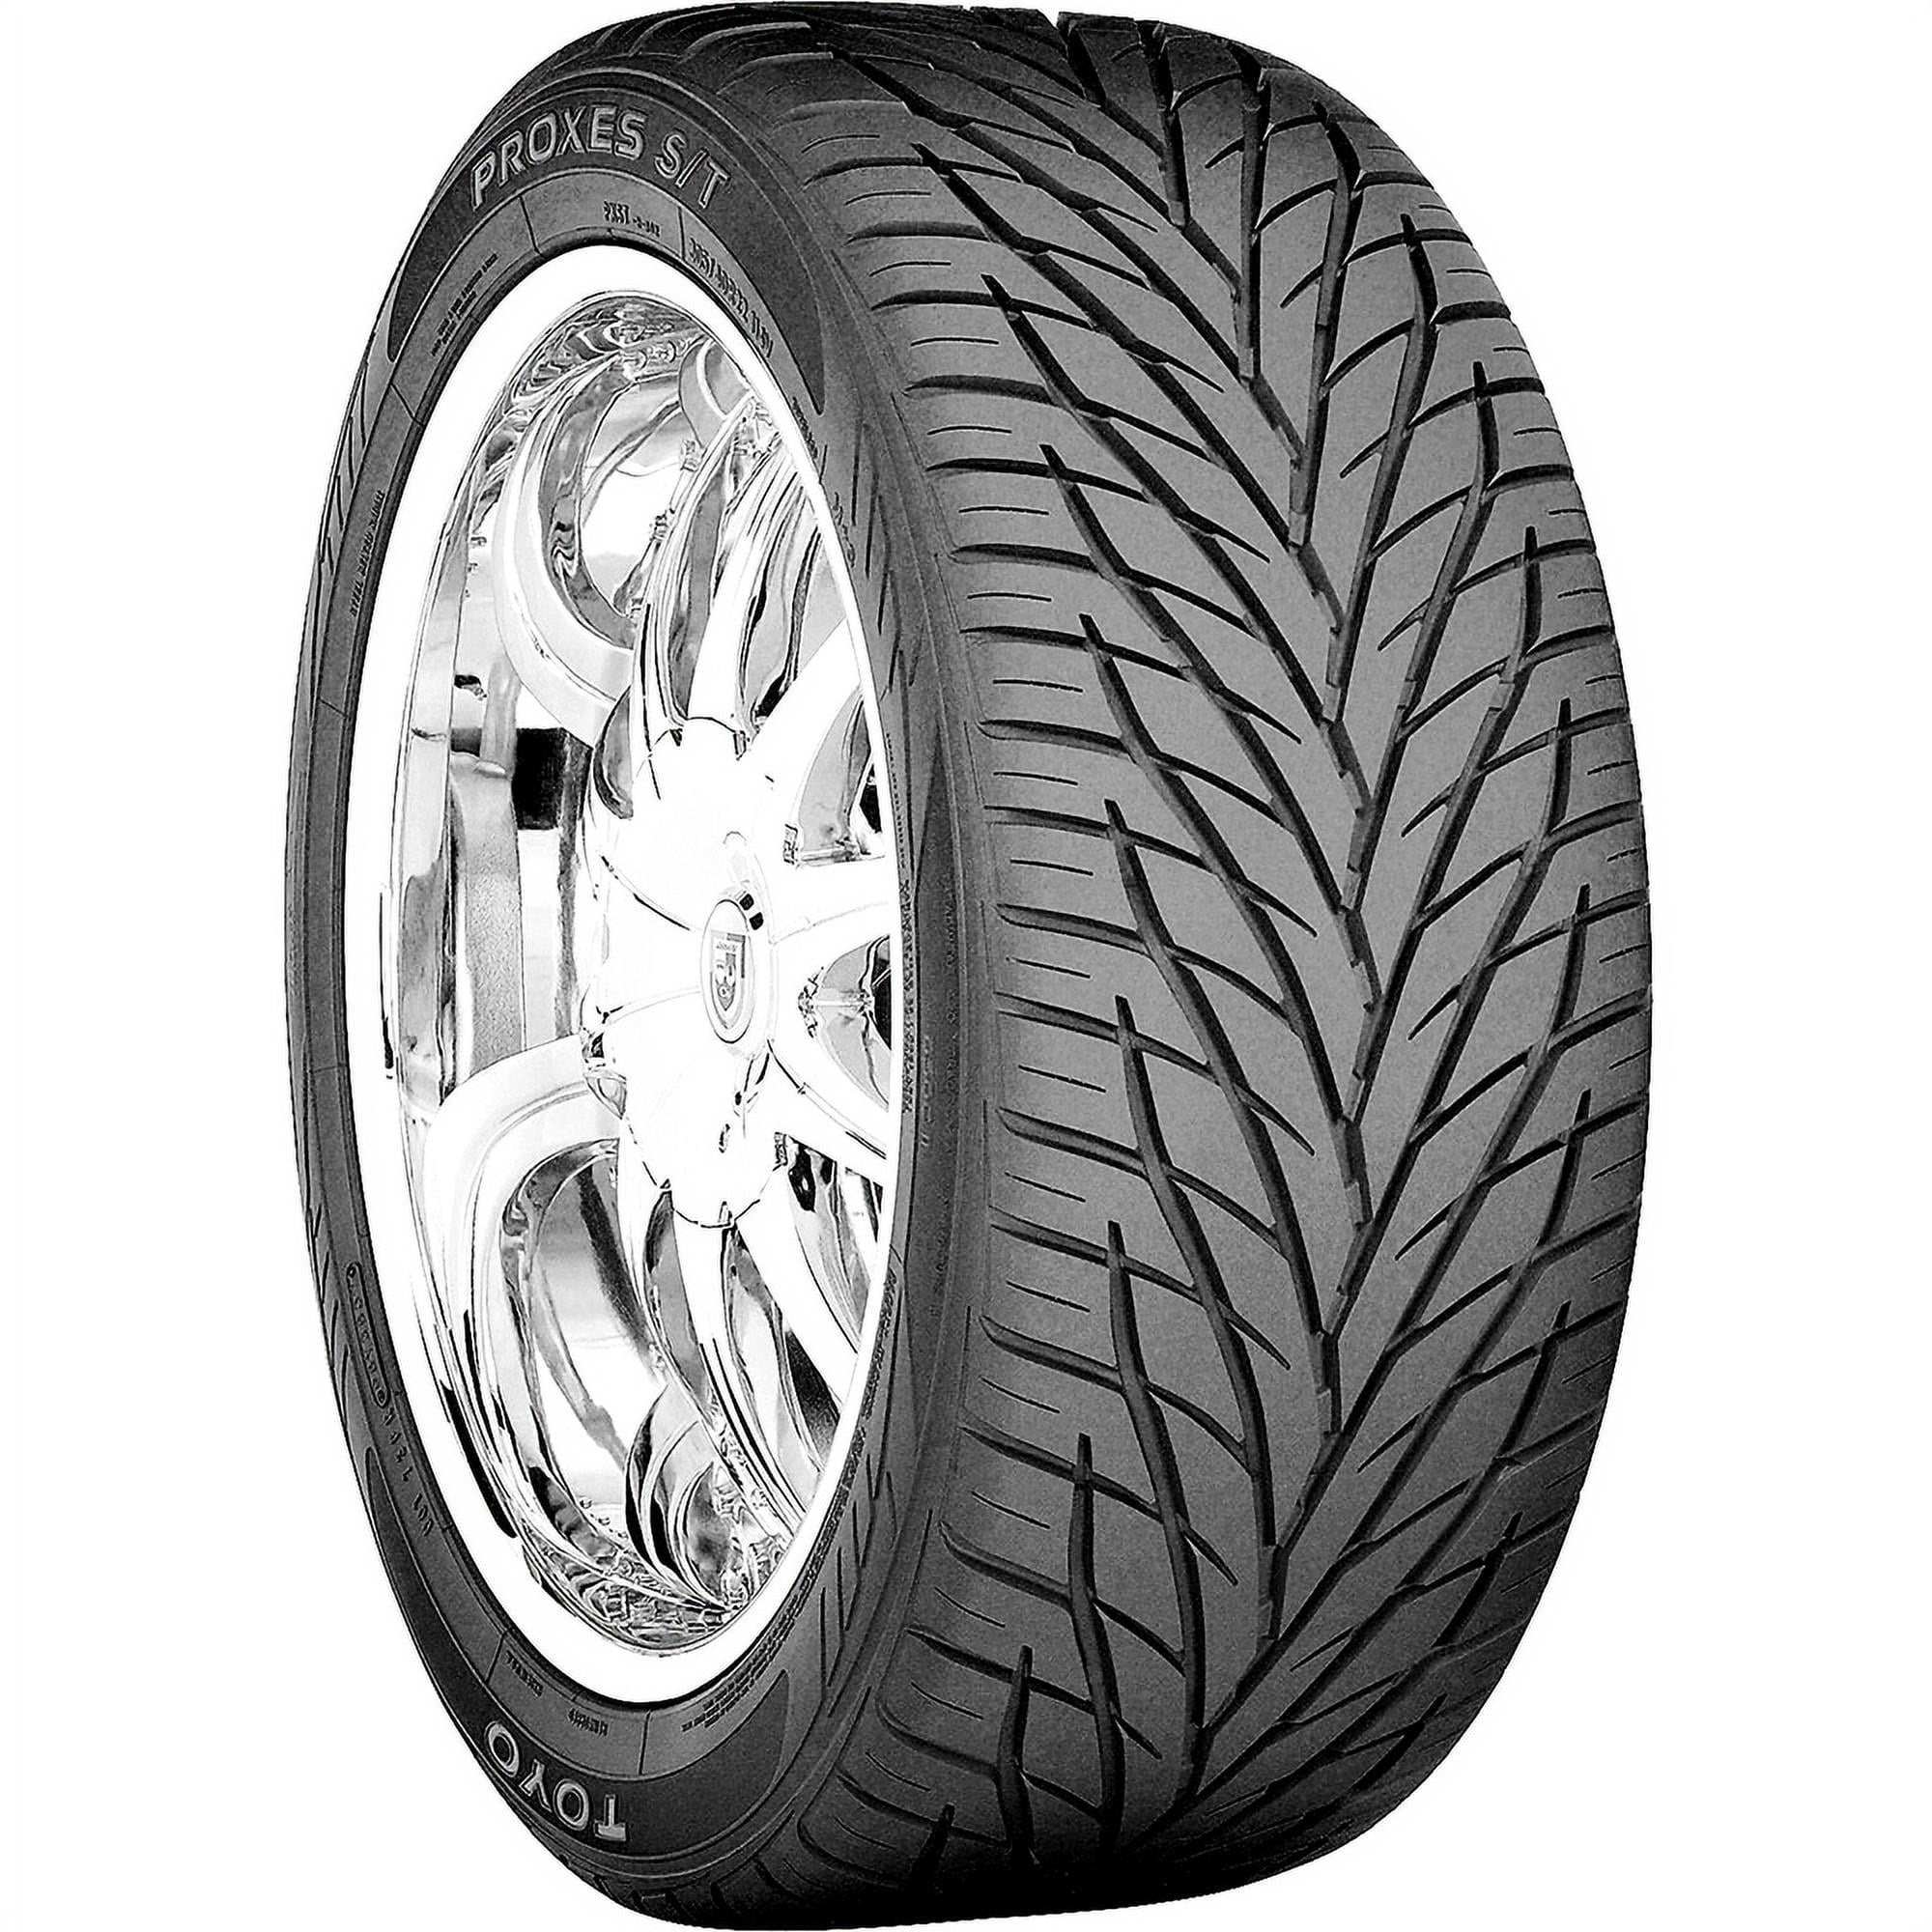 TOYO トーヨー PROXES プロクセス S/T 265/40R22 106V サマータイヤ SUV 4WD 4本セット 9A0E7K5zLg,  車、バイク、自転車 - windowrevival.co.nz